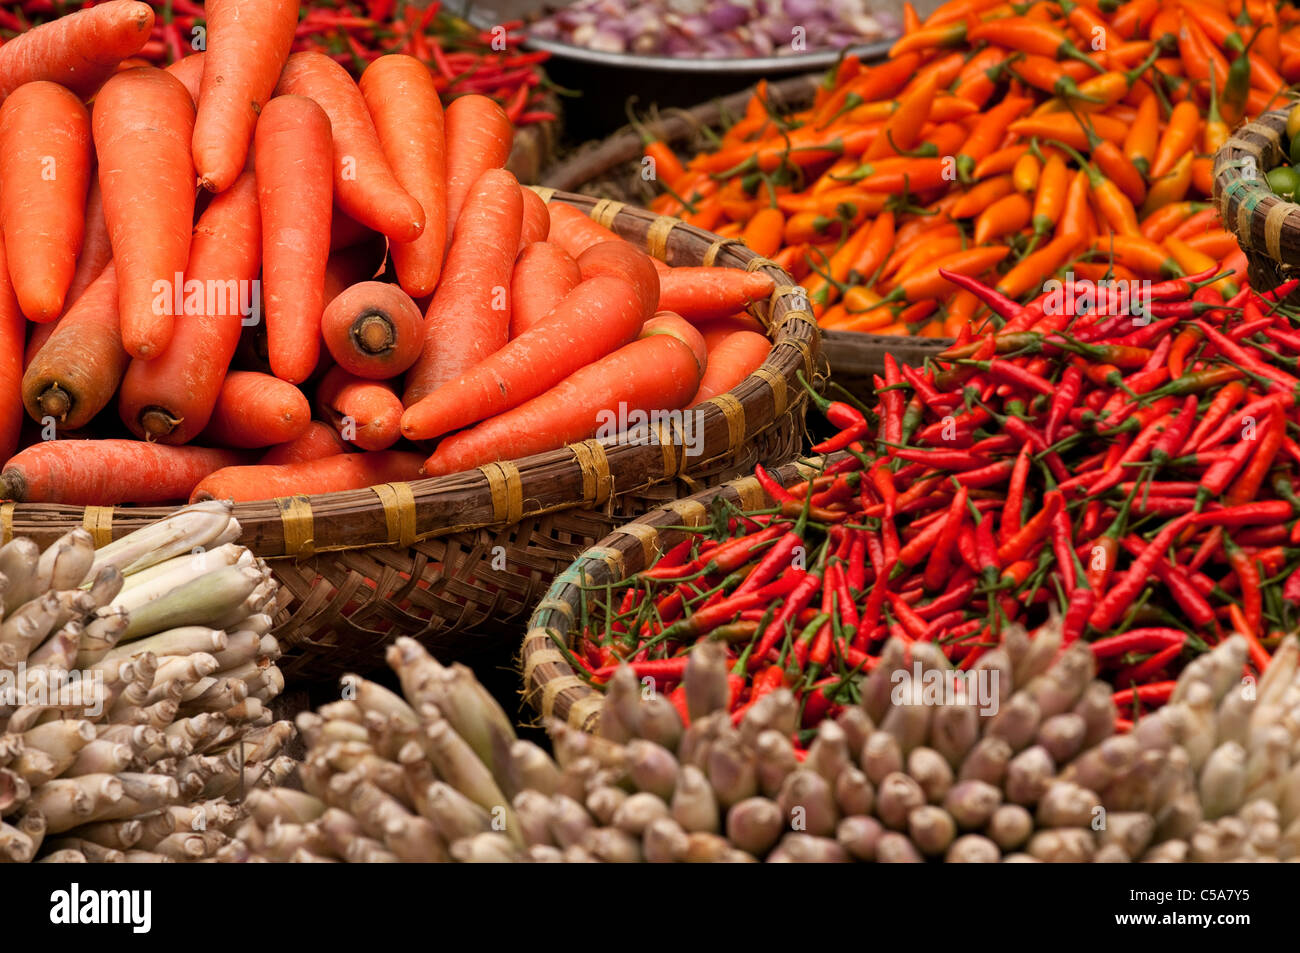 Baskets of carrots and chillies, Nguyen Thien Thuat St, near Cho Dong Xuan market, Hanoi Old Quarter, Vietnam Stock Photo